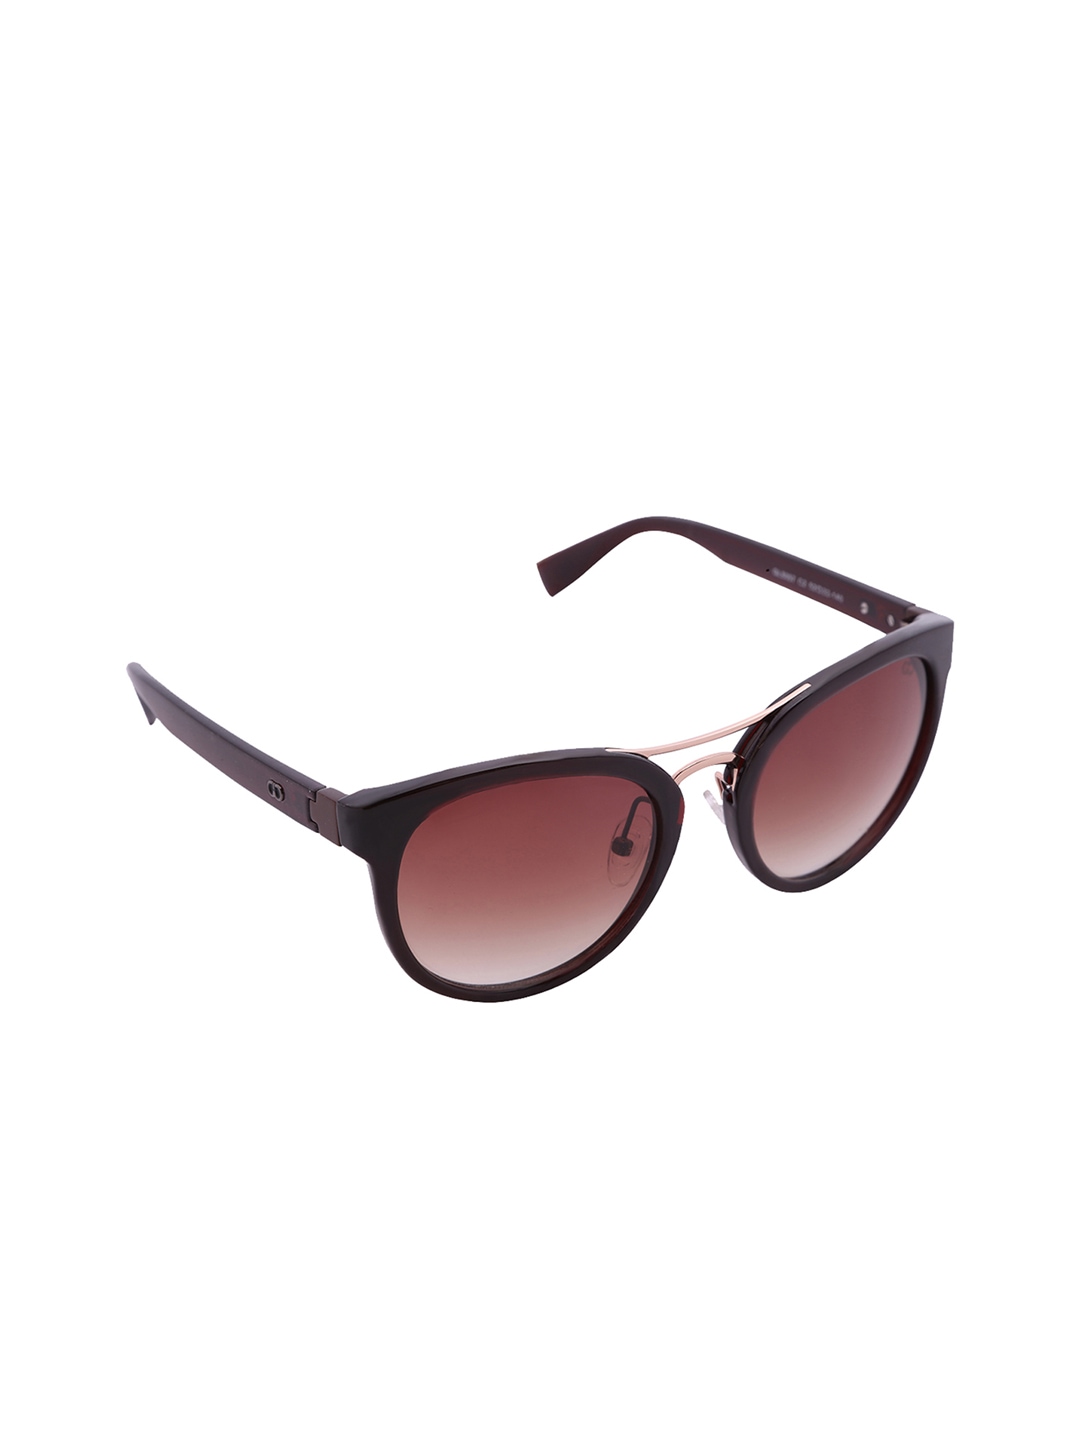 

GIO COLLECTION Women Oval Sunglasses GL5057C10, Brown